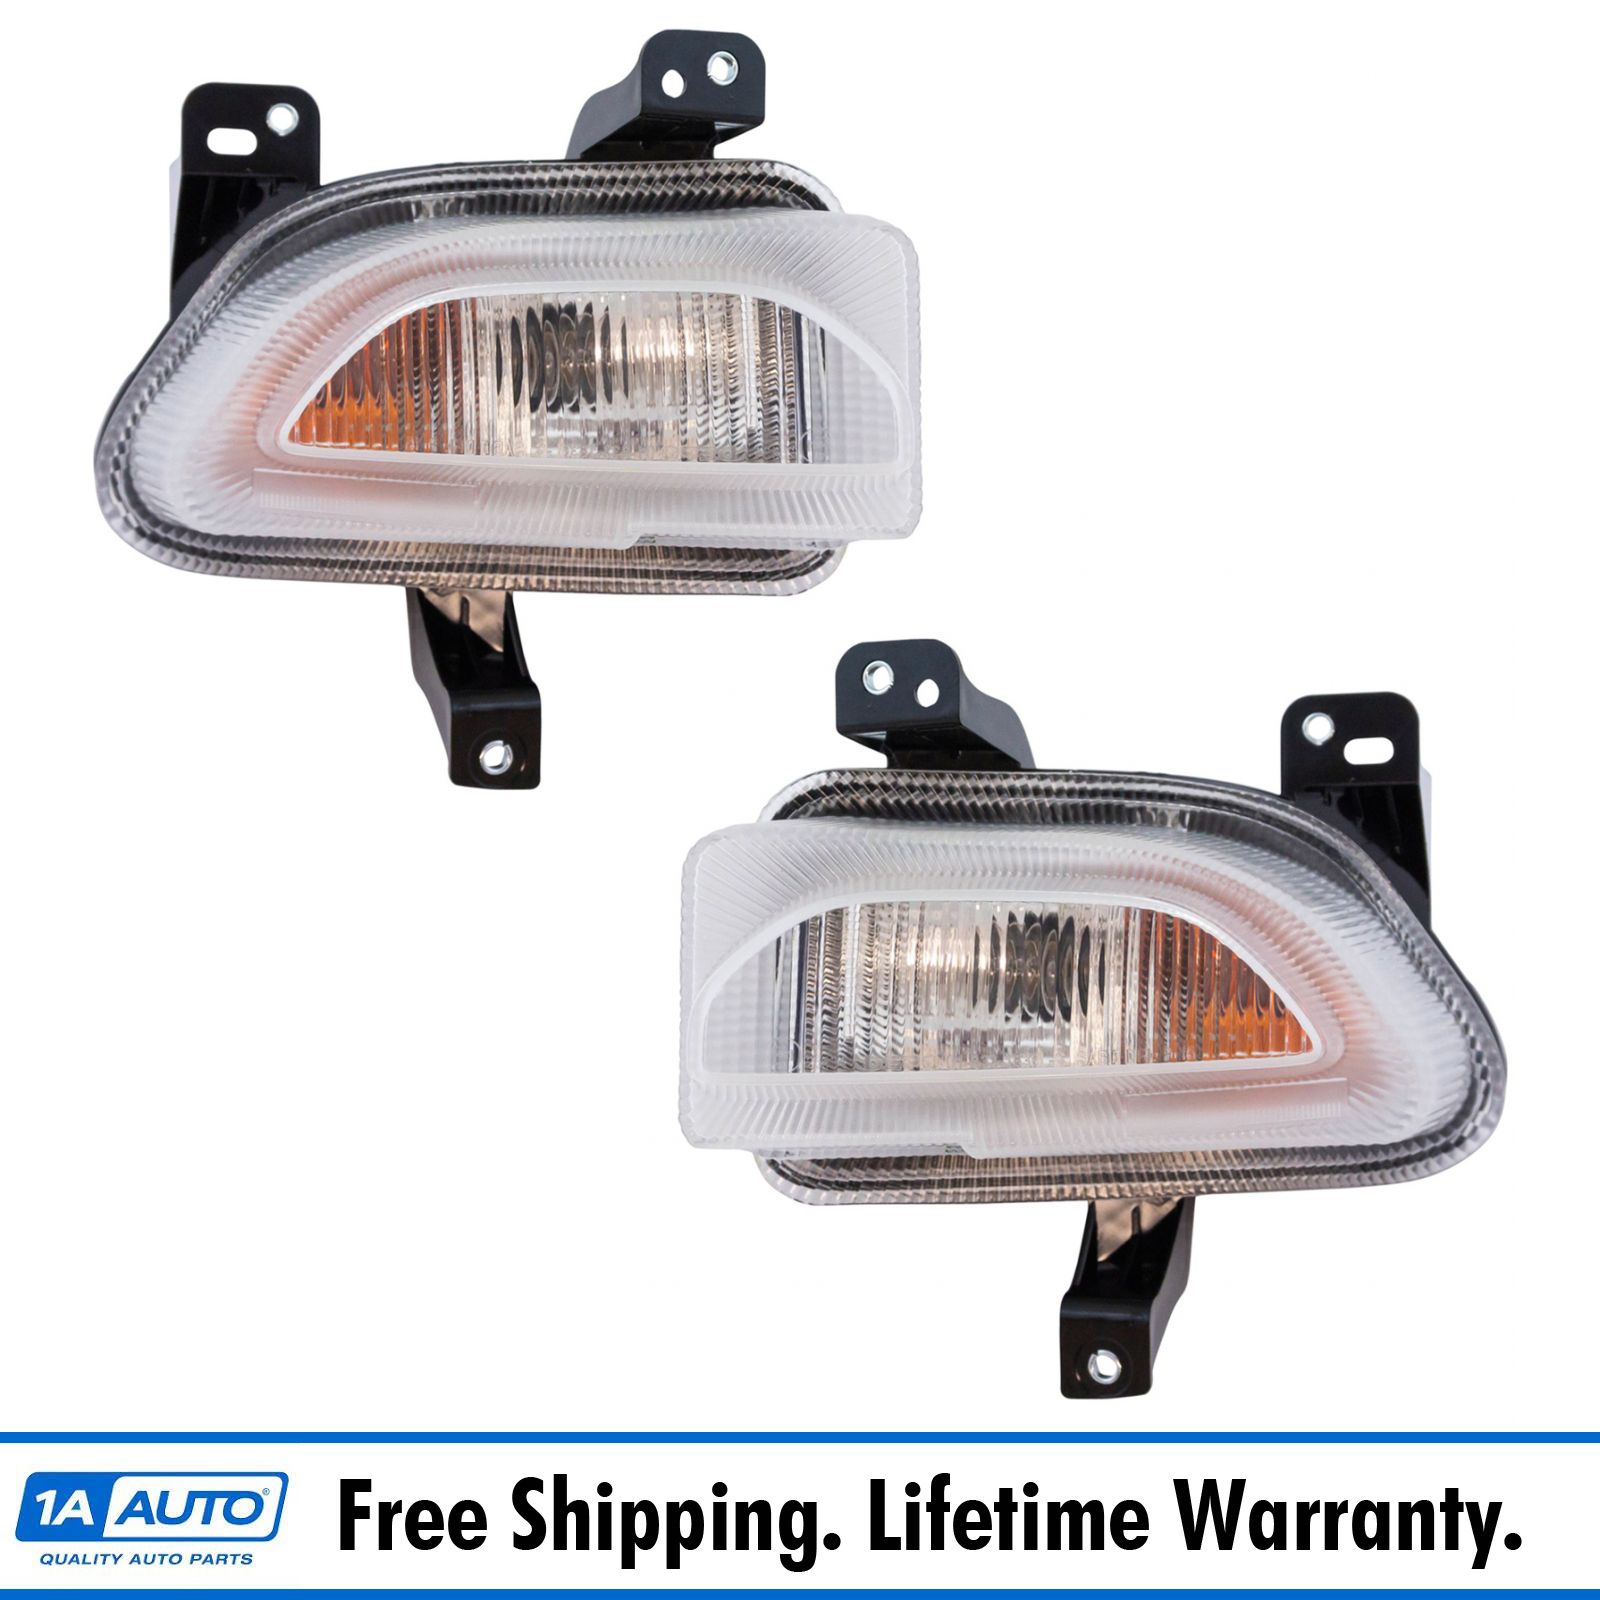 Fits 2015 2016 2017 2018 JEEP RENEGADE Front Signal/Corner Light Pair Driver and Passenger Side W/Bulbs Replaces CH2530105 CH2531105 DOT Certified CarLights360 